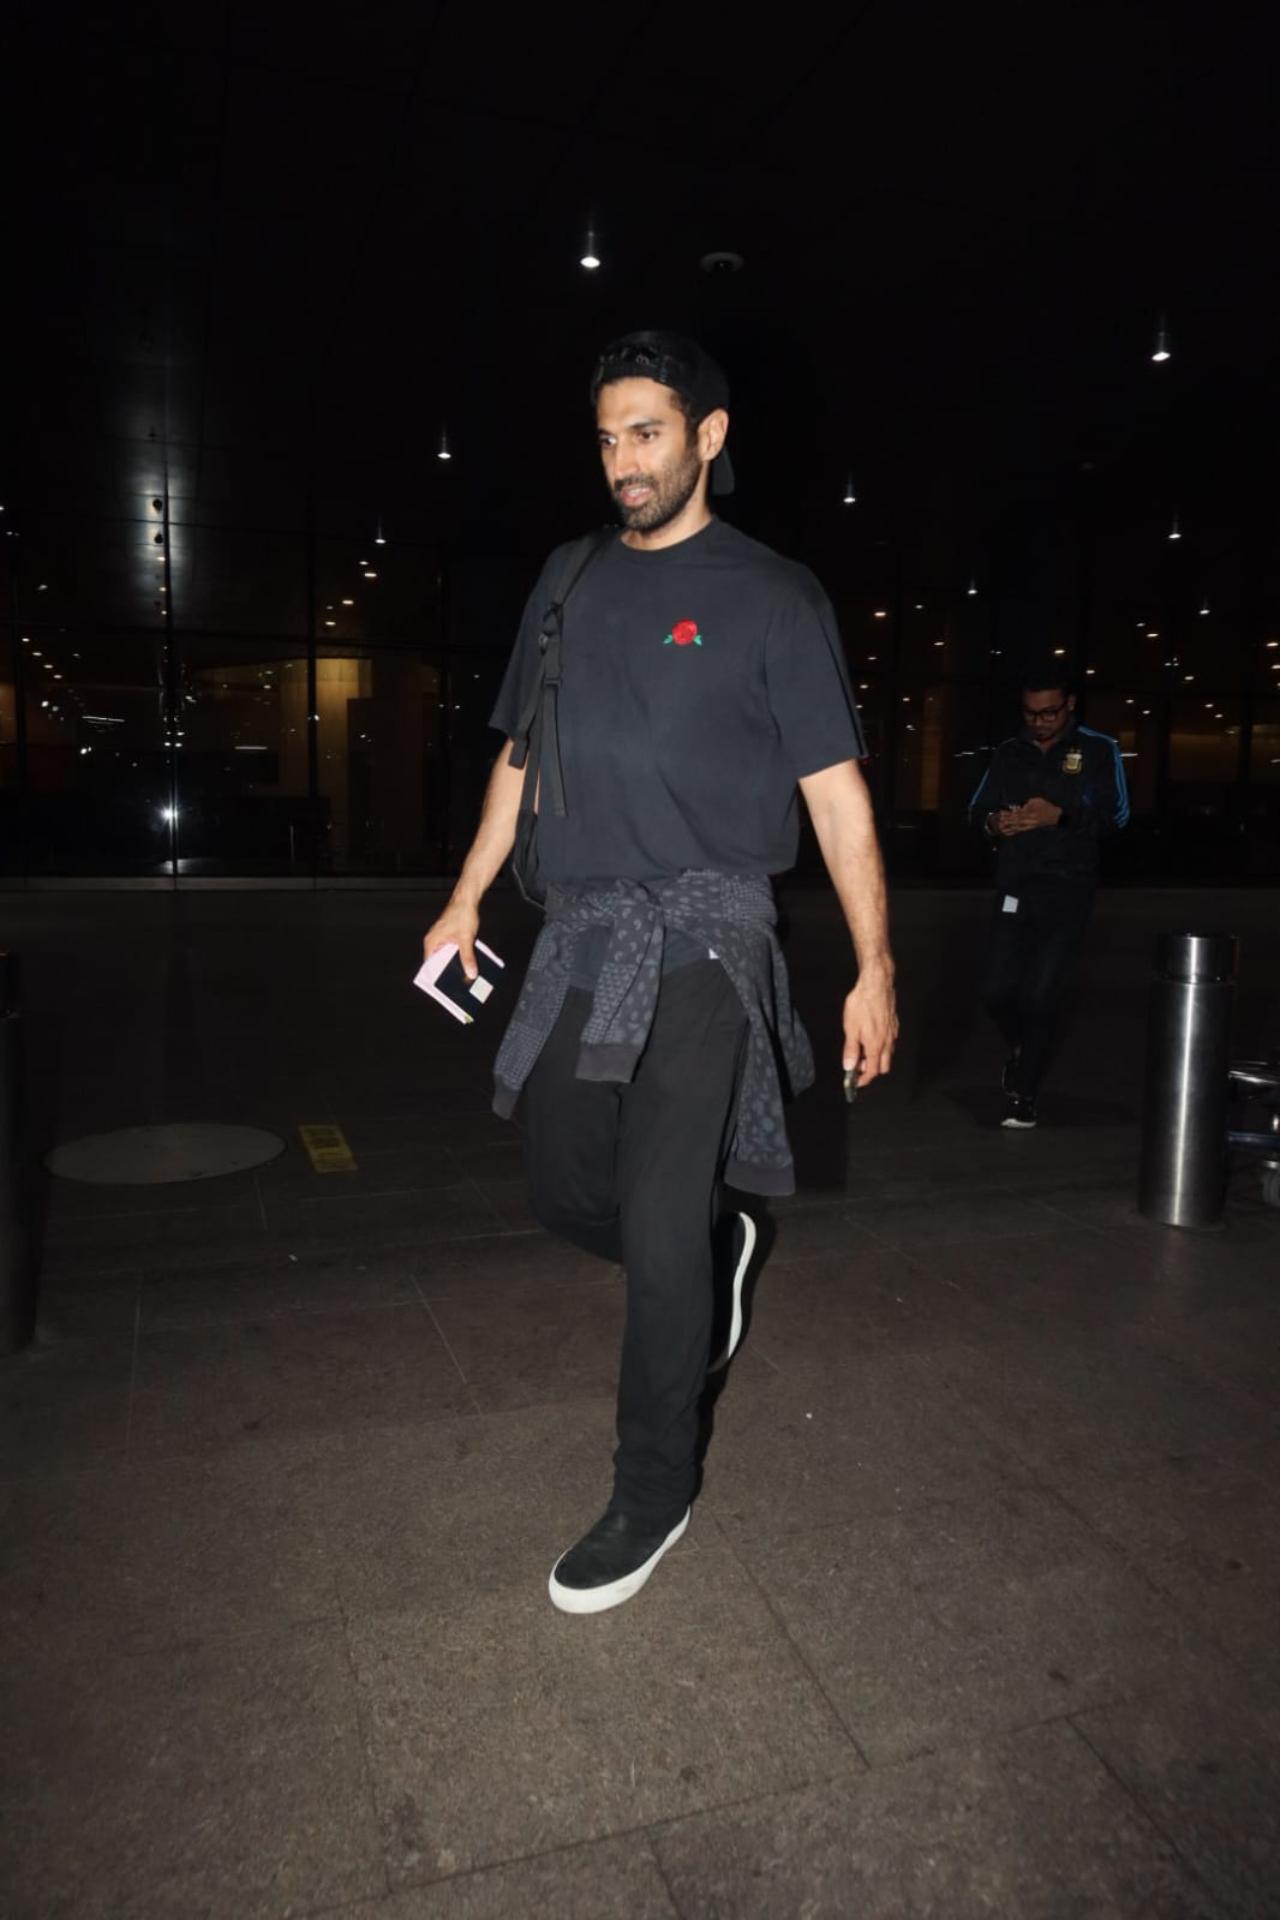 Aditya Roy Kapur was seen in an all-black casuals on Wednesday night as he reached Mumbai airport